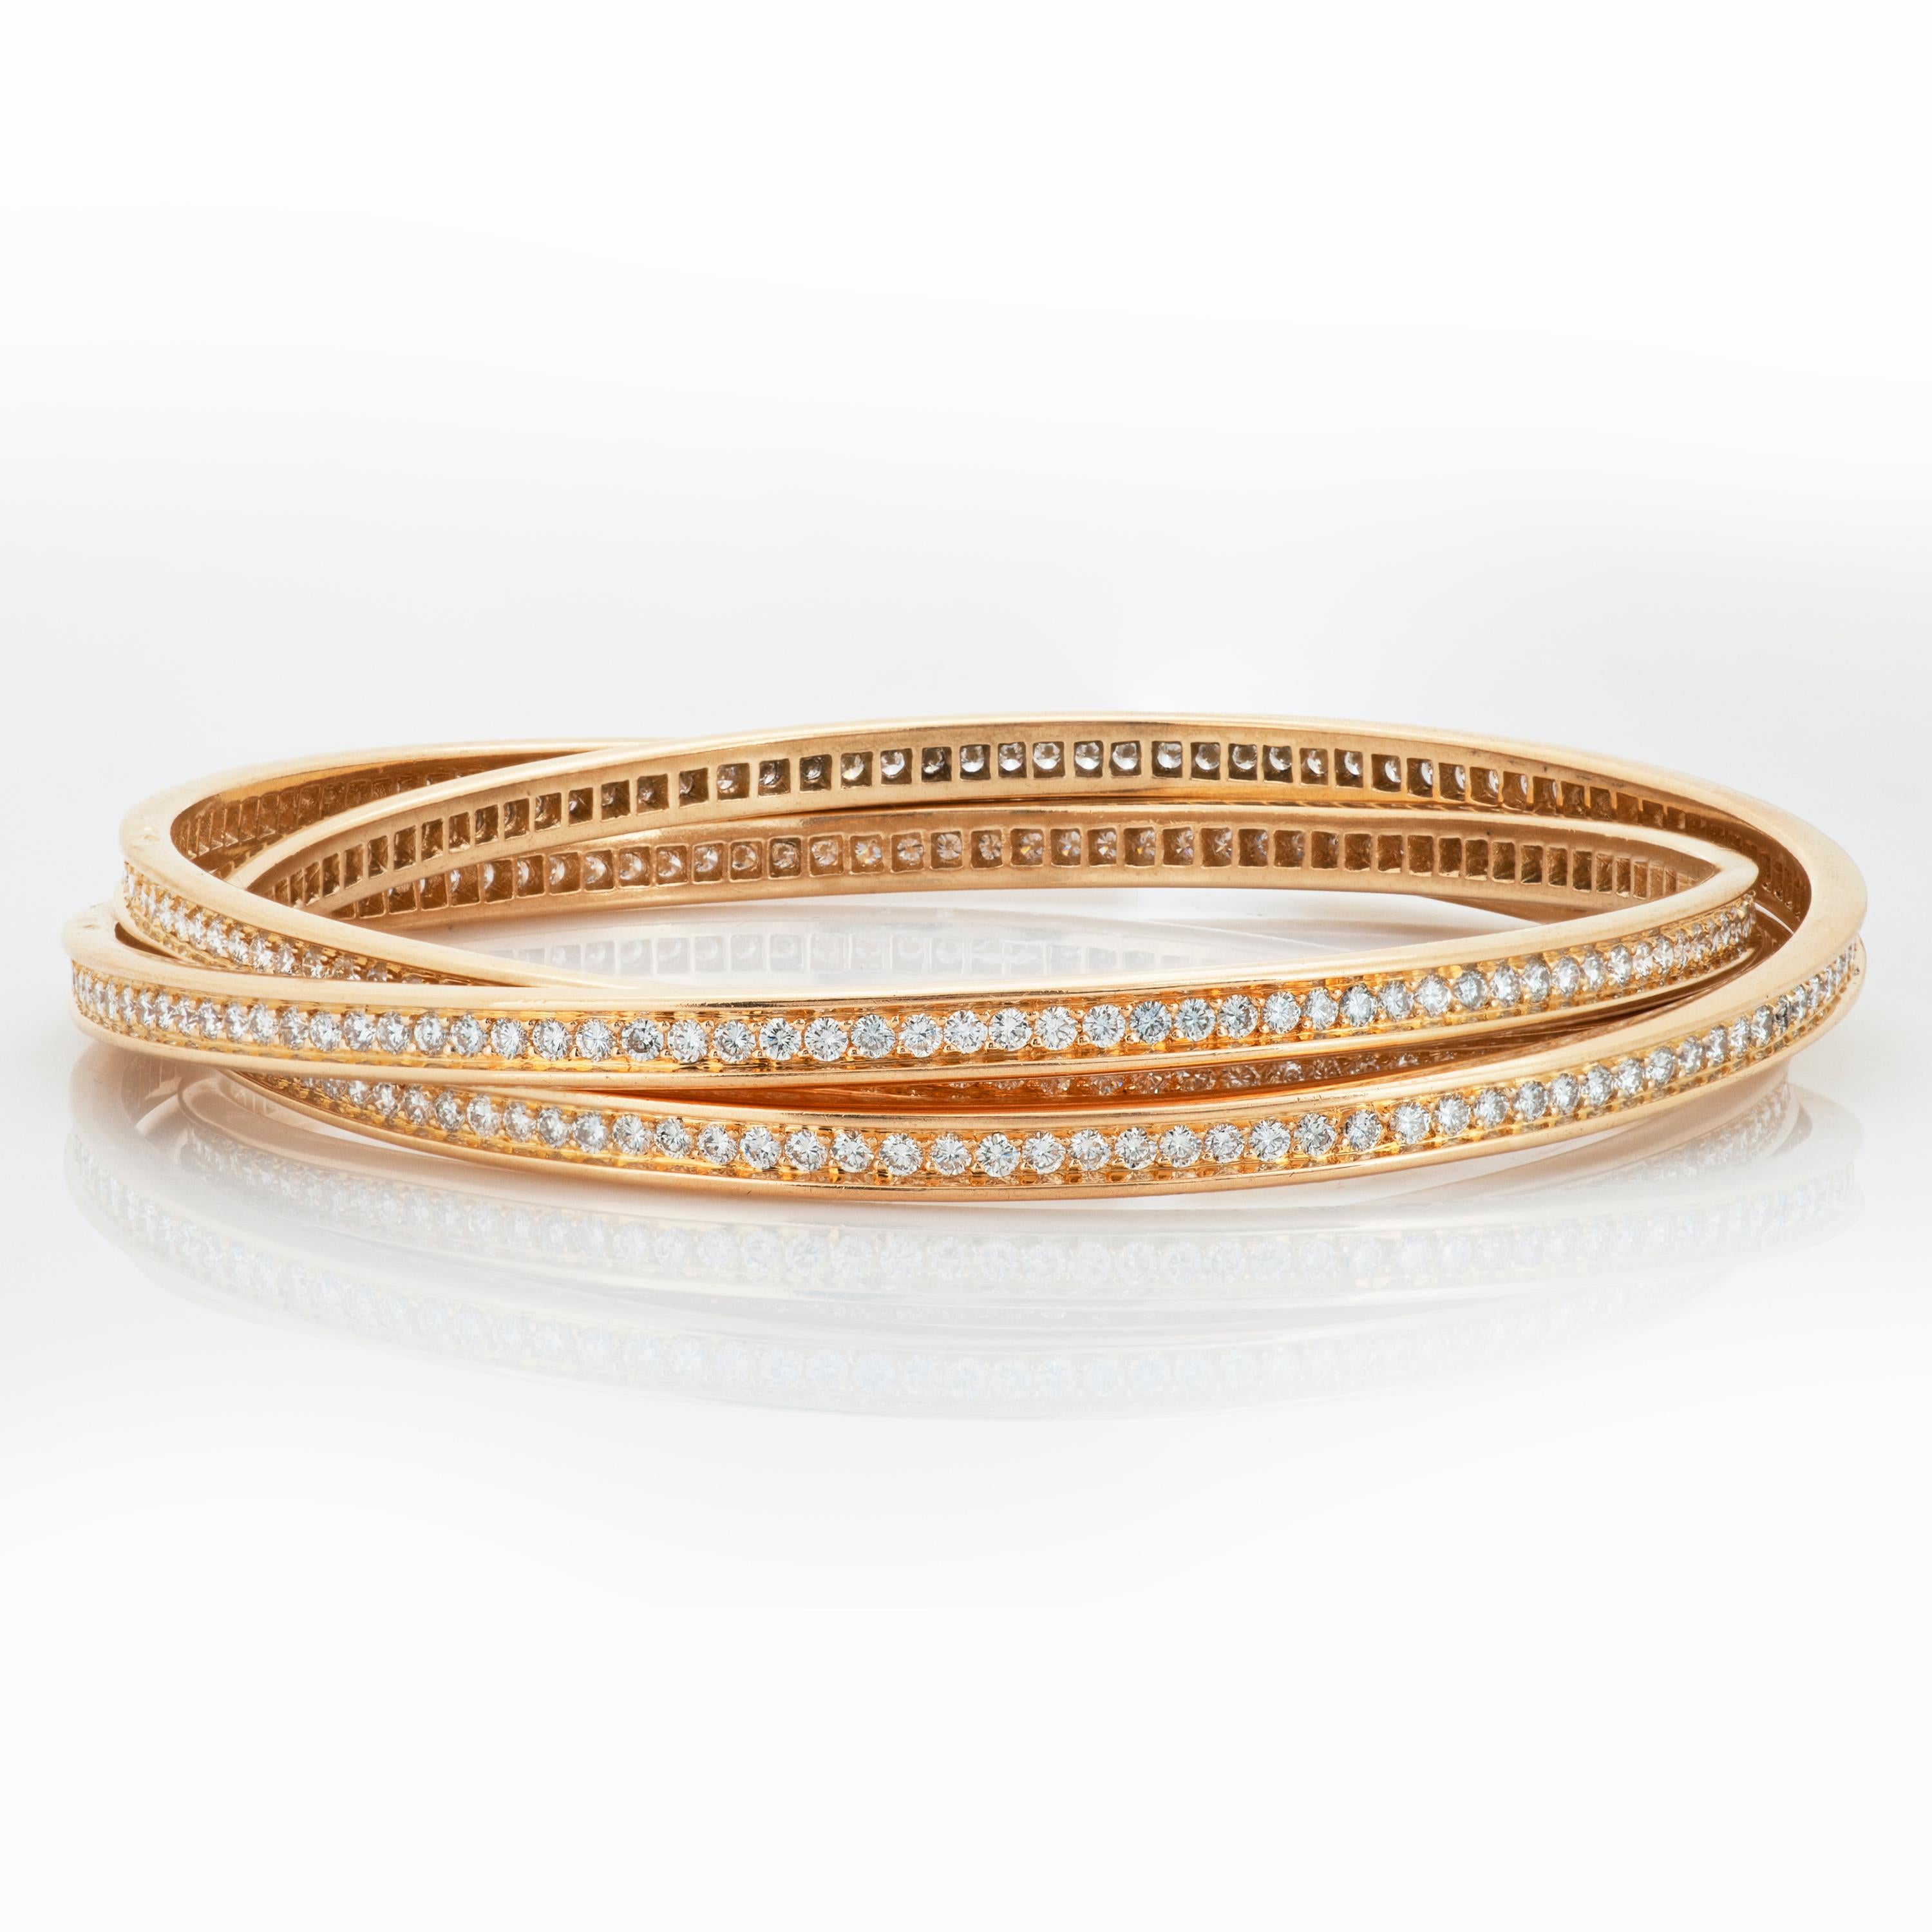 Cartier 18k yellow gold and diamond trinity rolling bangle bracelet with French hallmarks and Cartier box. 

This Cartier trinity bracelet is made up of 3 intertwining bangles set all the way around with round brilliant cut diamonds totaling